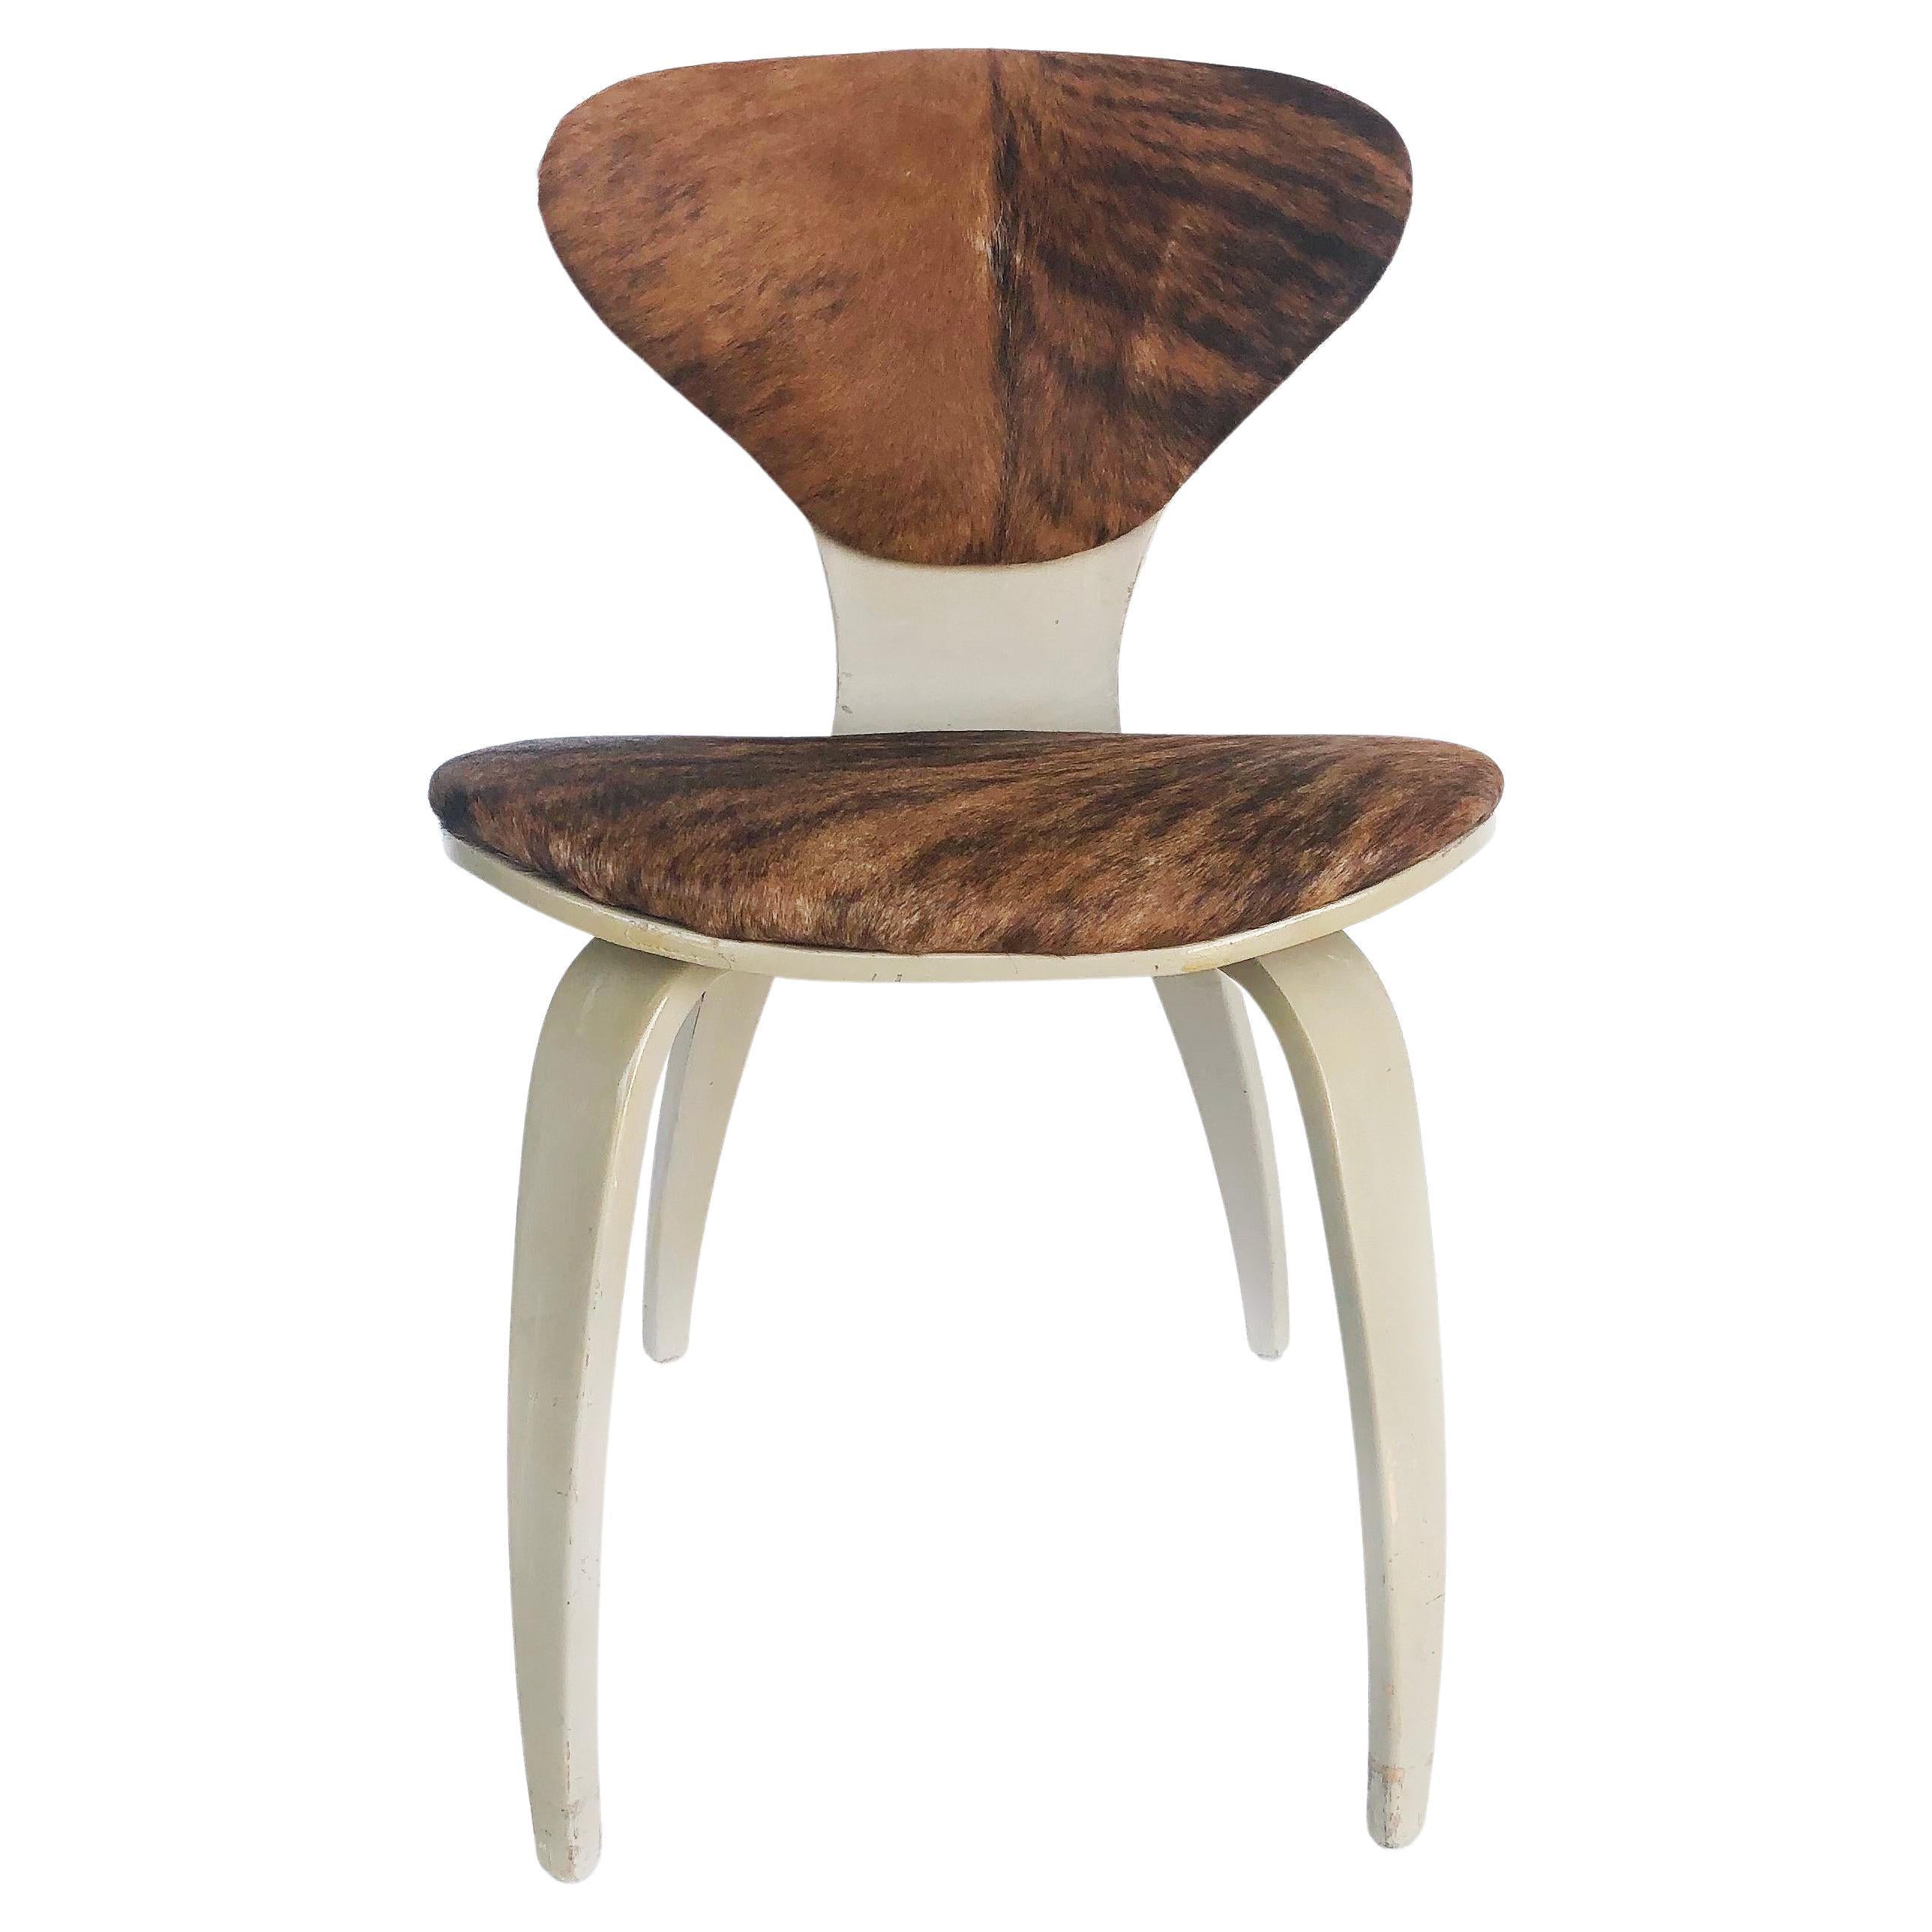 Norman Cherner Plycraft Chair Upholstered in Cowhide and Painted